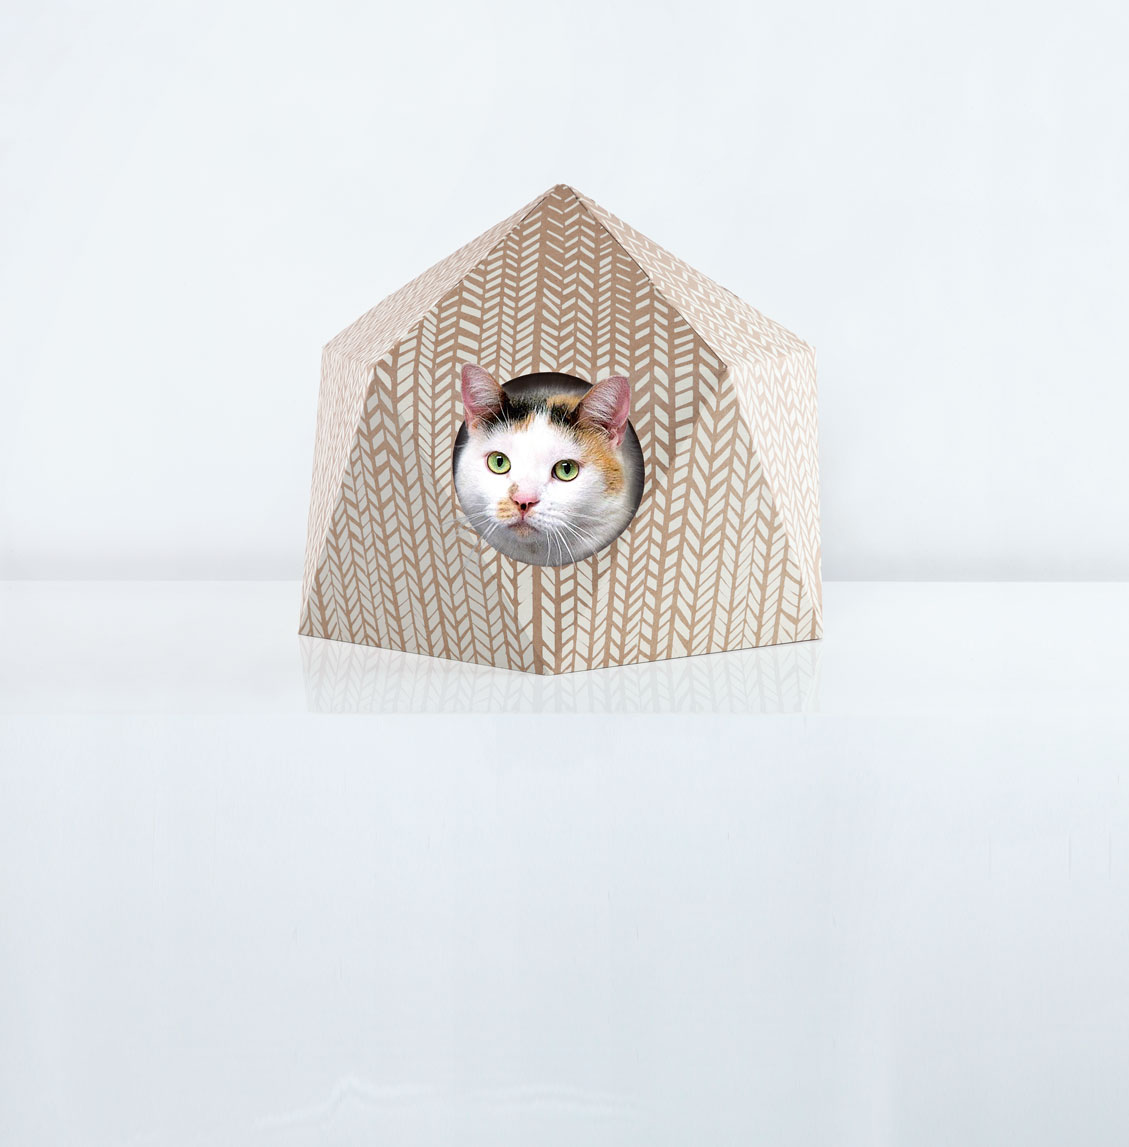 Butterfly poses in The Cat Cube by Delphine Courier from Pet-tecture